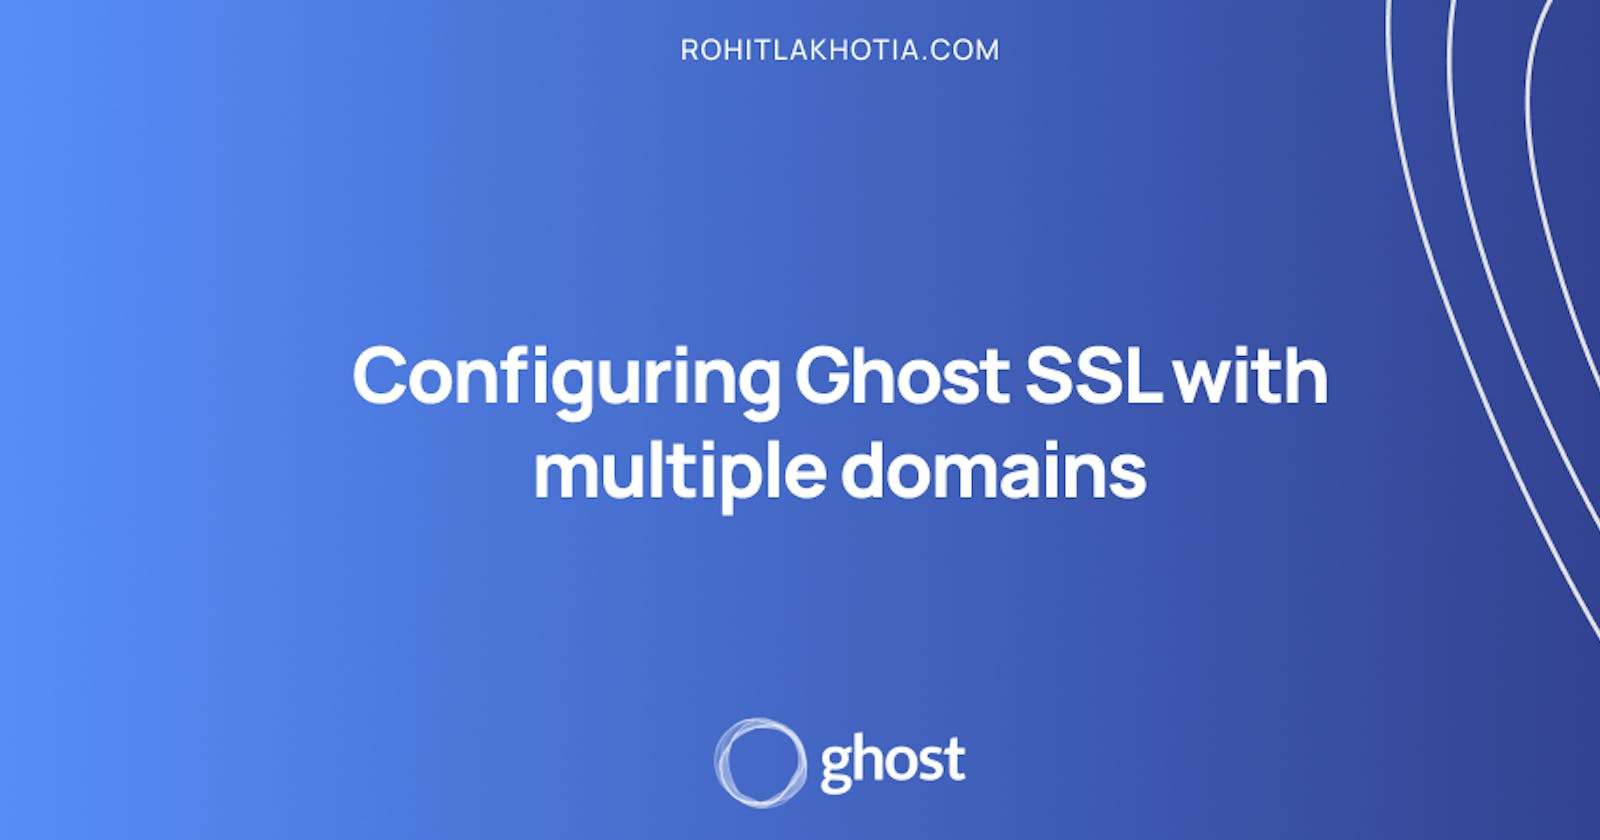 Configuring Ghost SSL with multiple domains